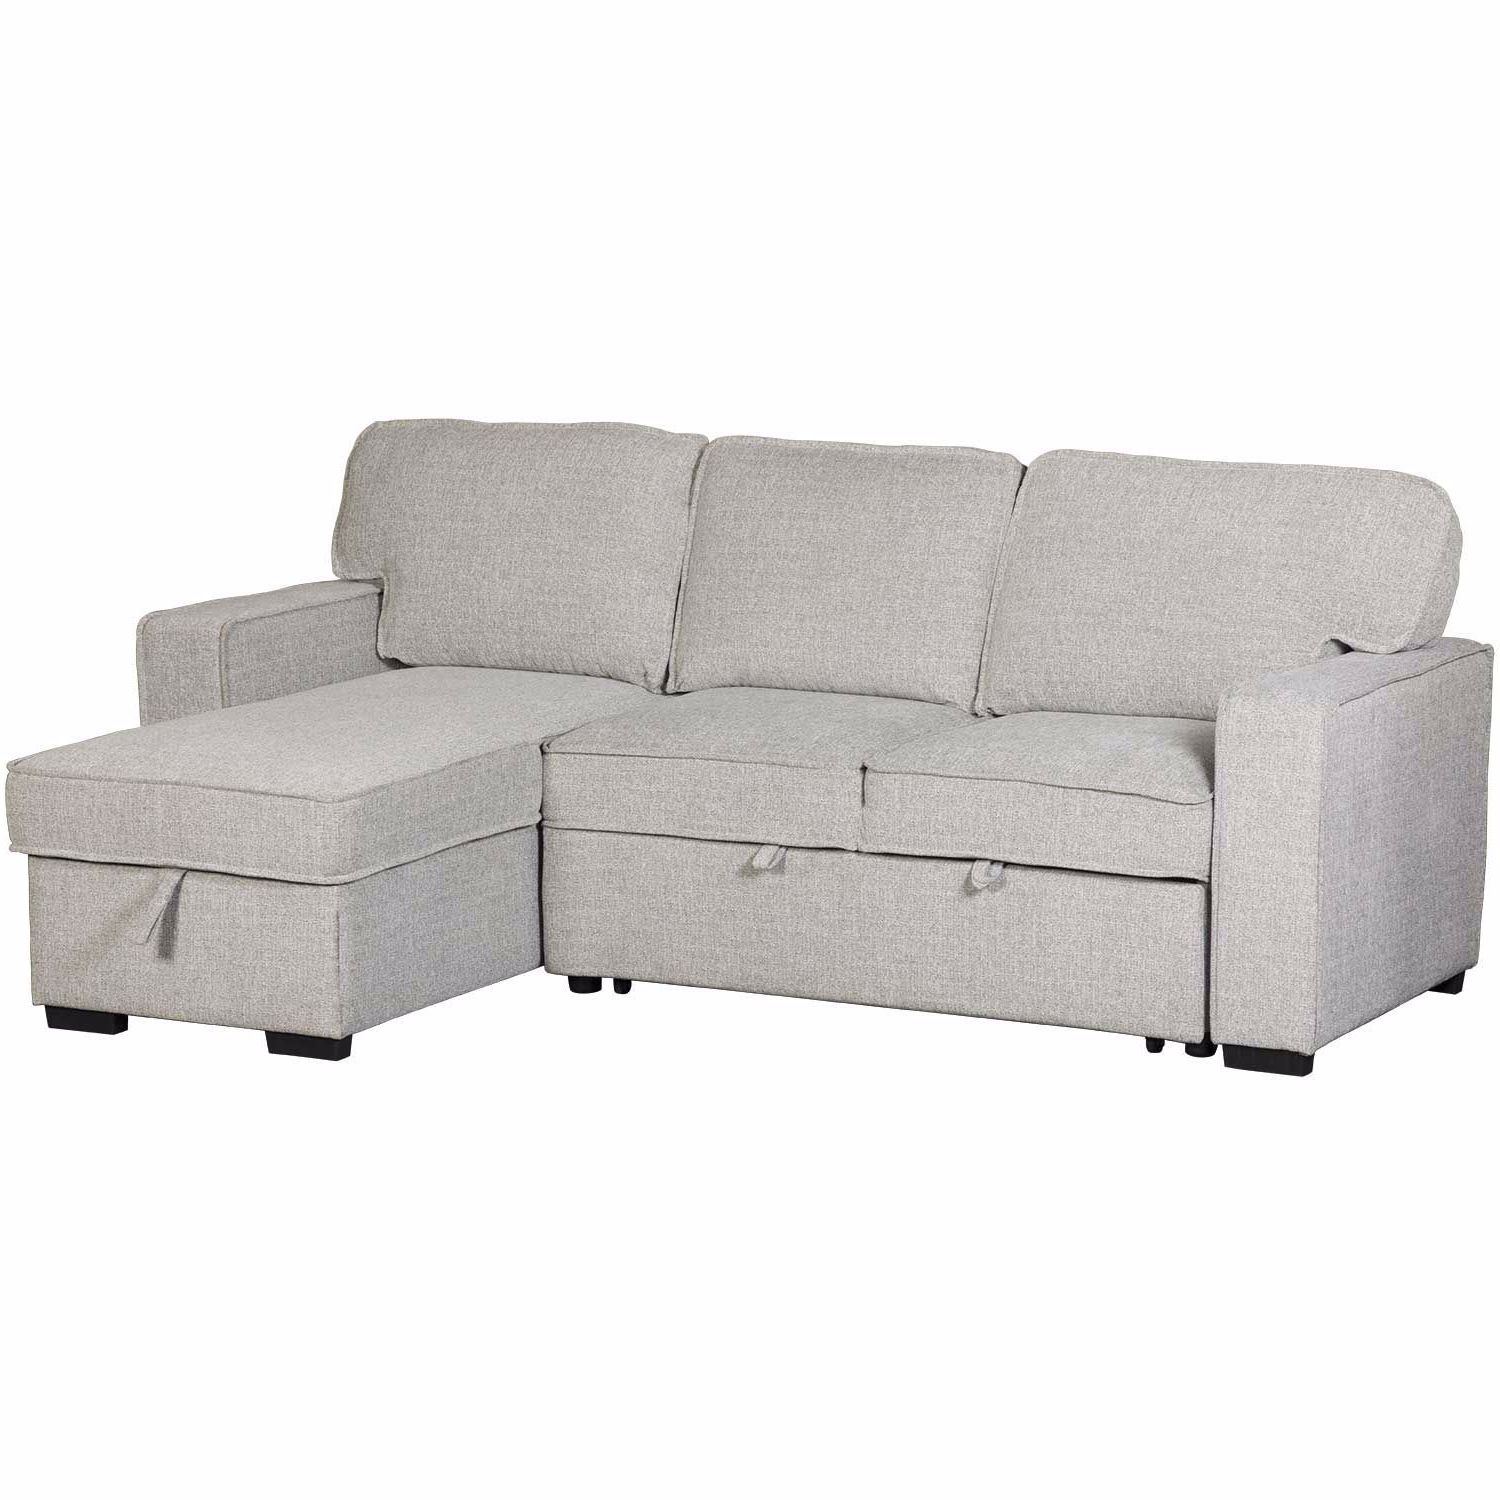 Palisades Reversible Small Space Sectional Sofas With Storage Within Well Known Kent Reversible Sofa Chaise With Storage 1d 684 Ll Rc Arm (View 16 of 20)